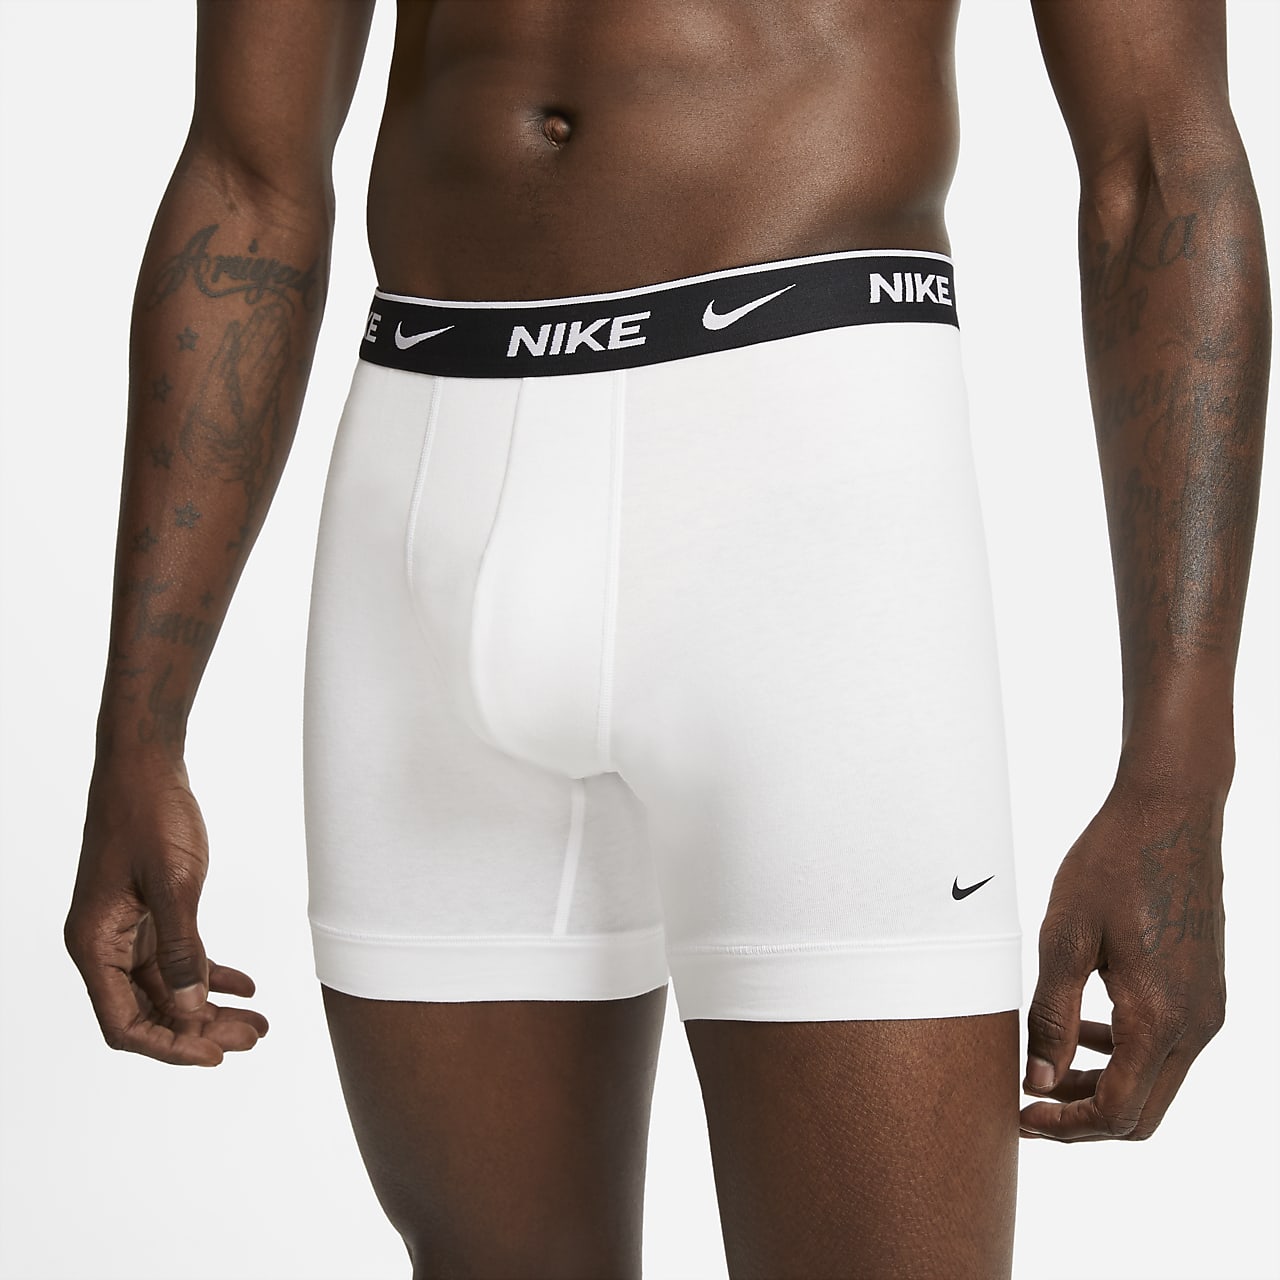 nike boxer brief size chart